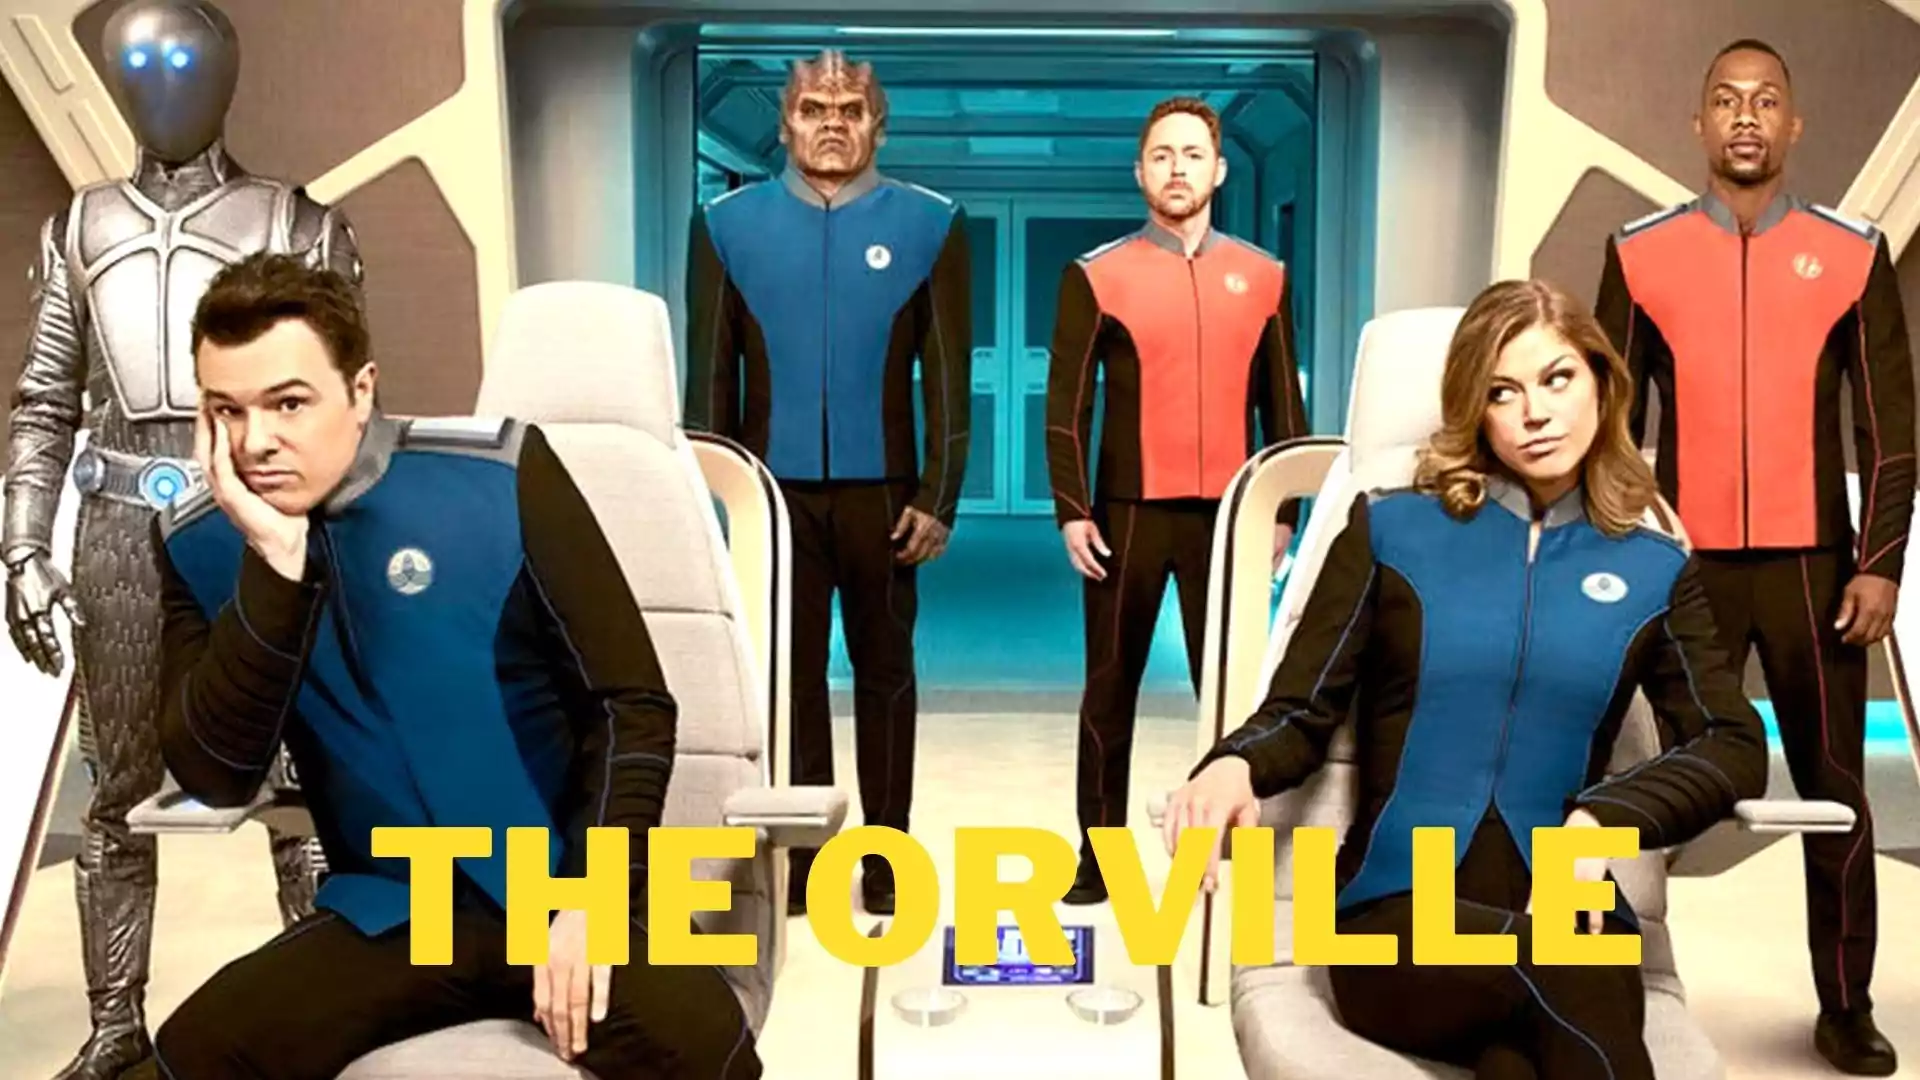 The Orville Parents guide and Age Rating